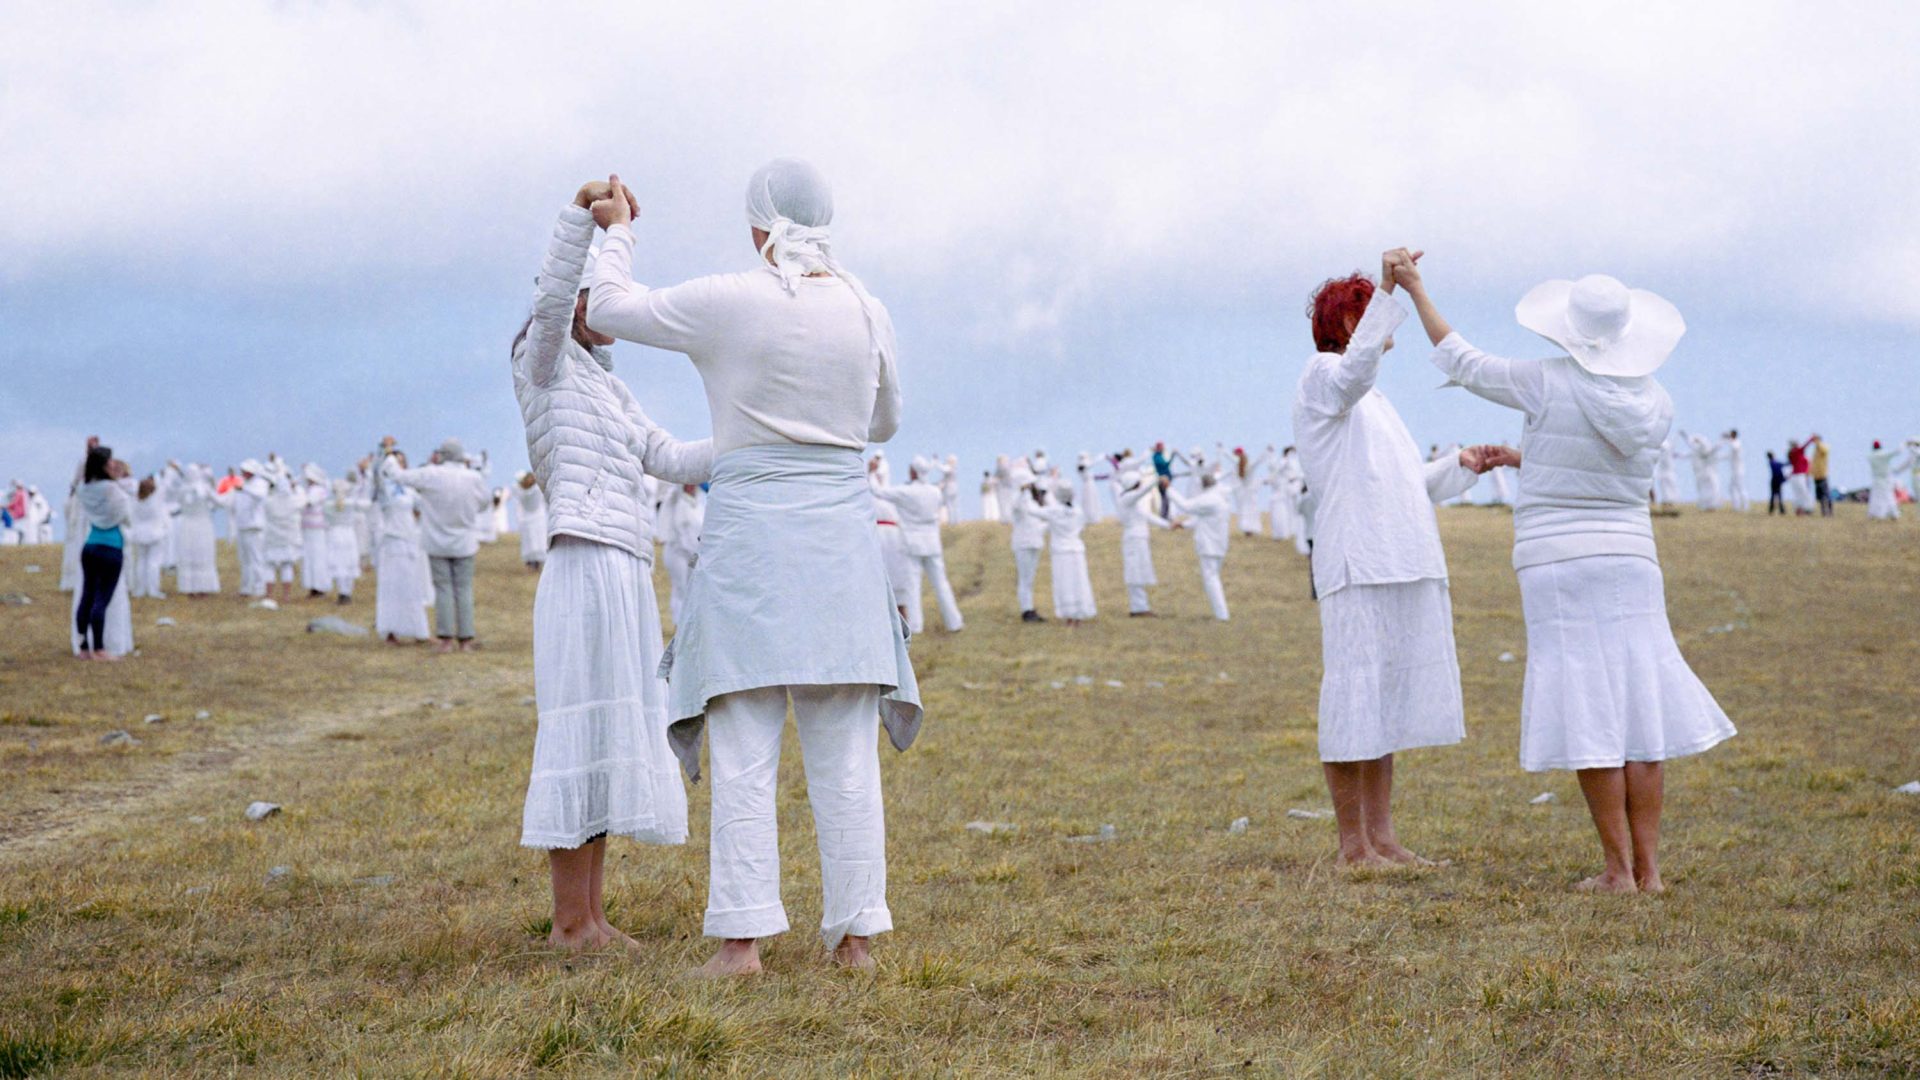 When this photographer stumbled upon a religious dance in the mountains, his whole life changed 